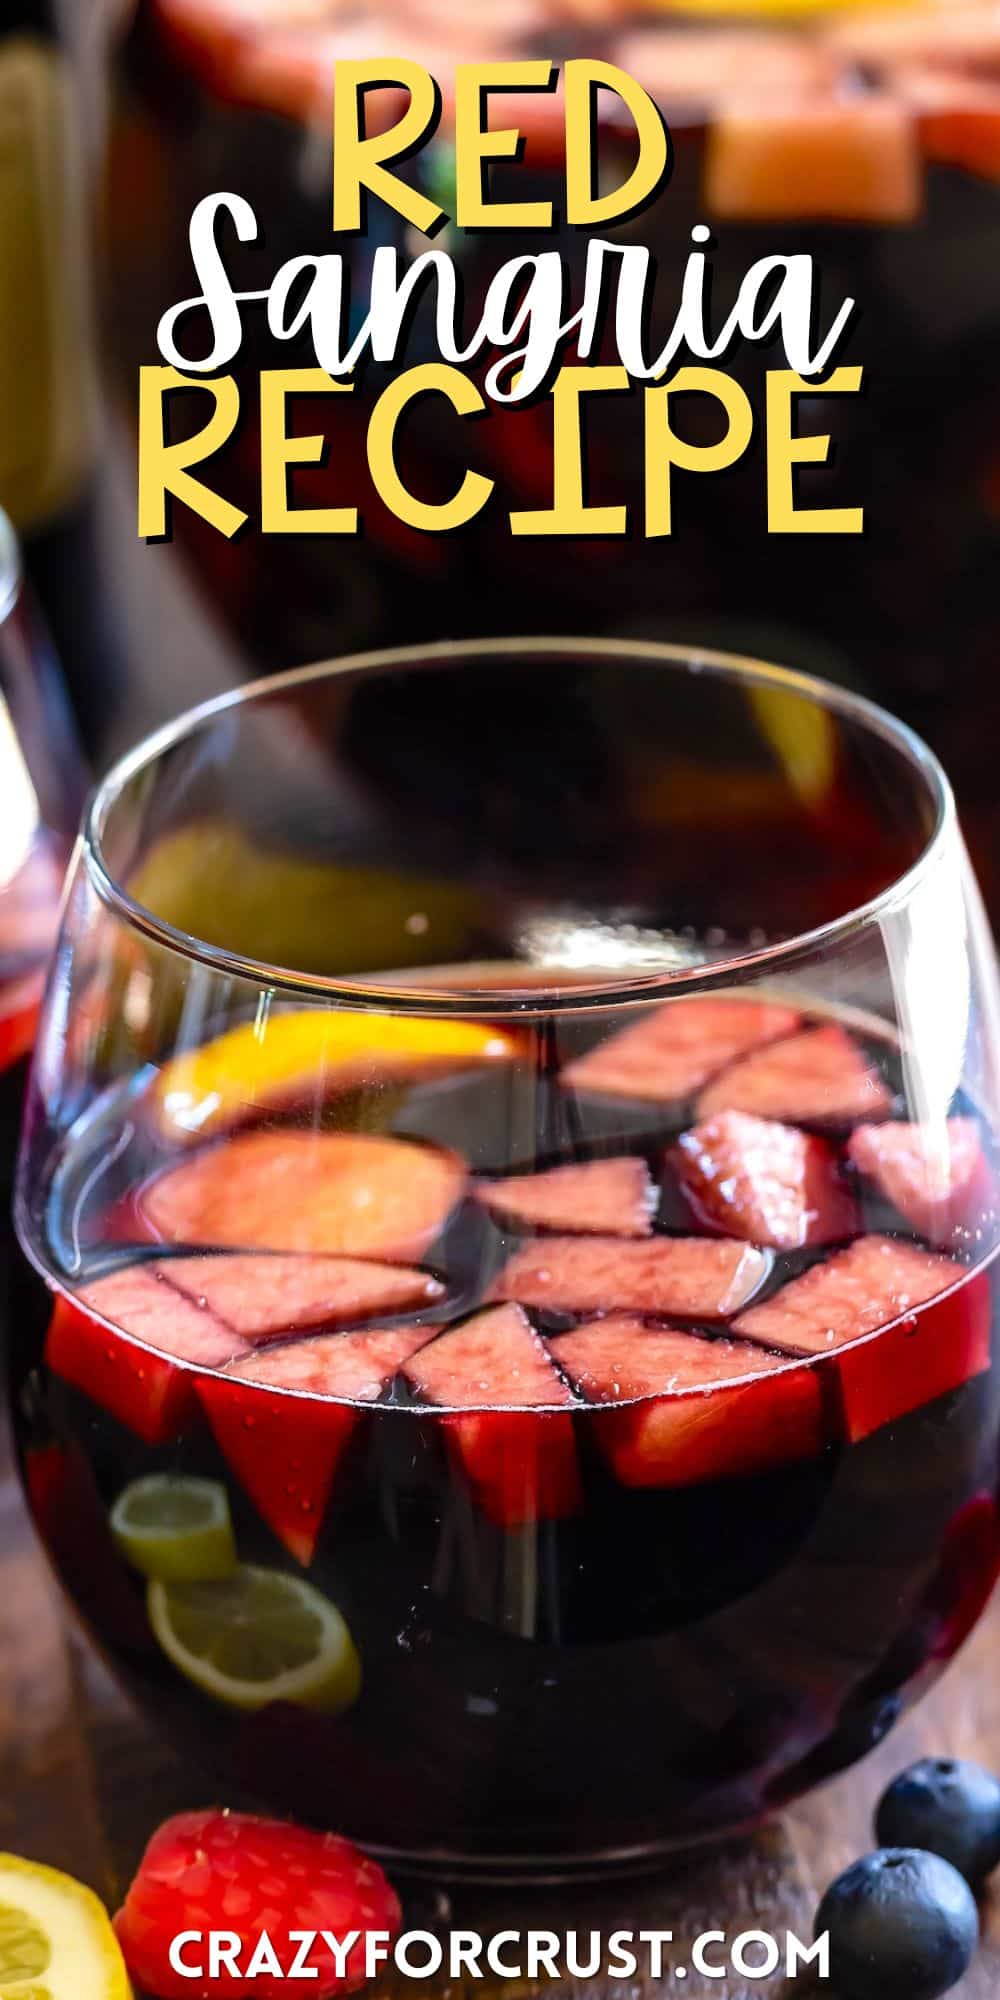 dark red wine in a short clear glass with fruit chopped up inside with words on the image.